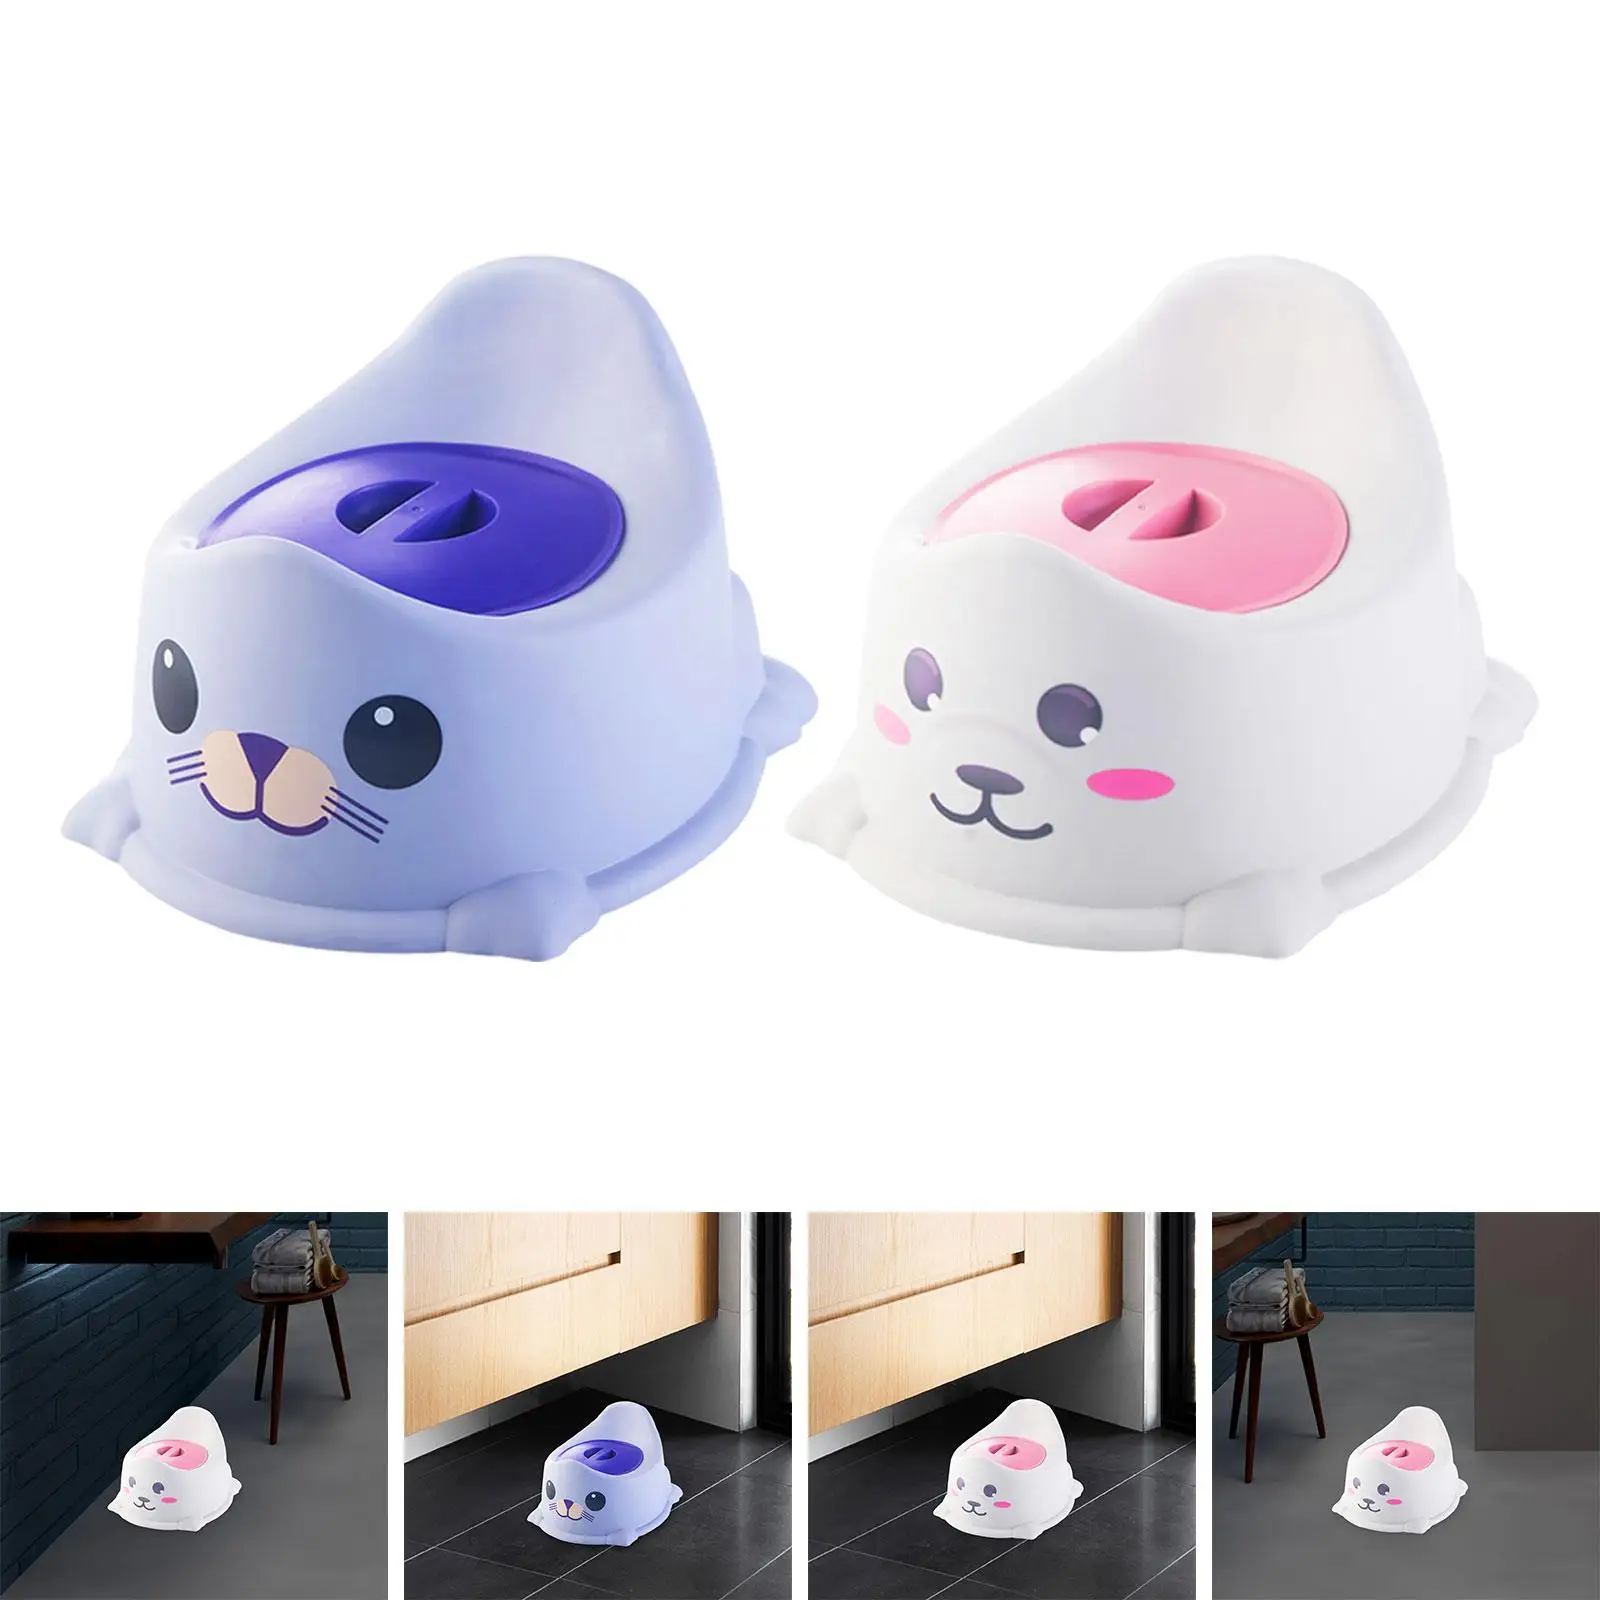 Baby Potty Training Chair Adorable Comfortable Portable Indoor with Lid Nonslip Children Animal Potty Urinal Toddlers Toilet